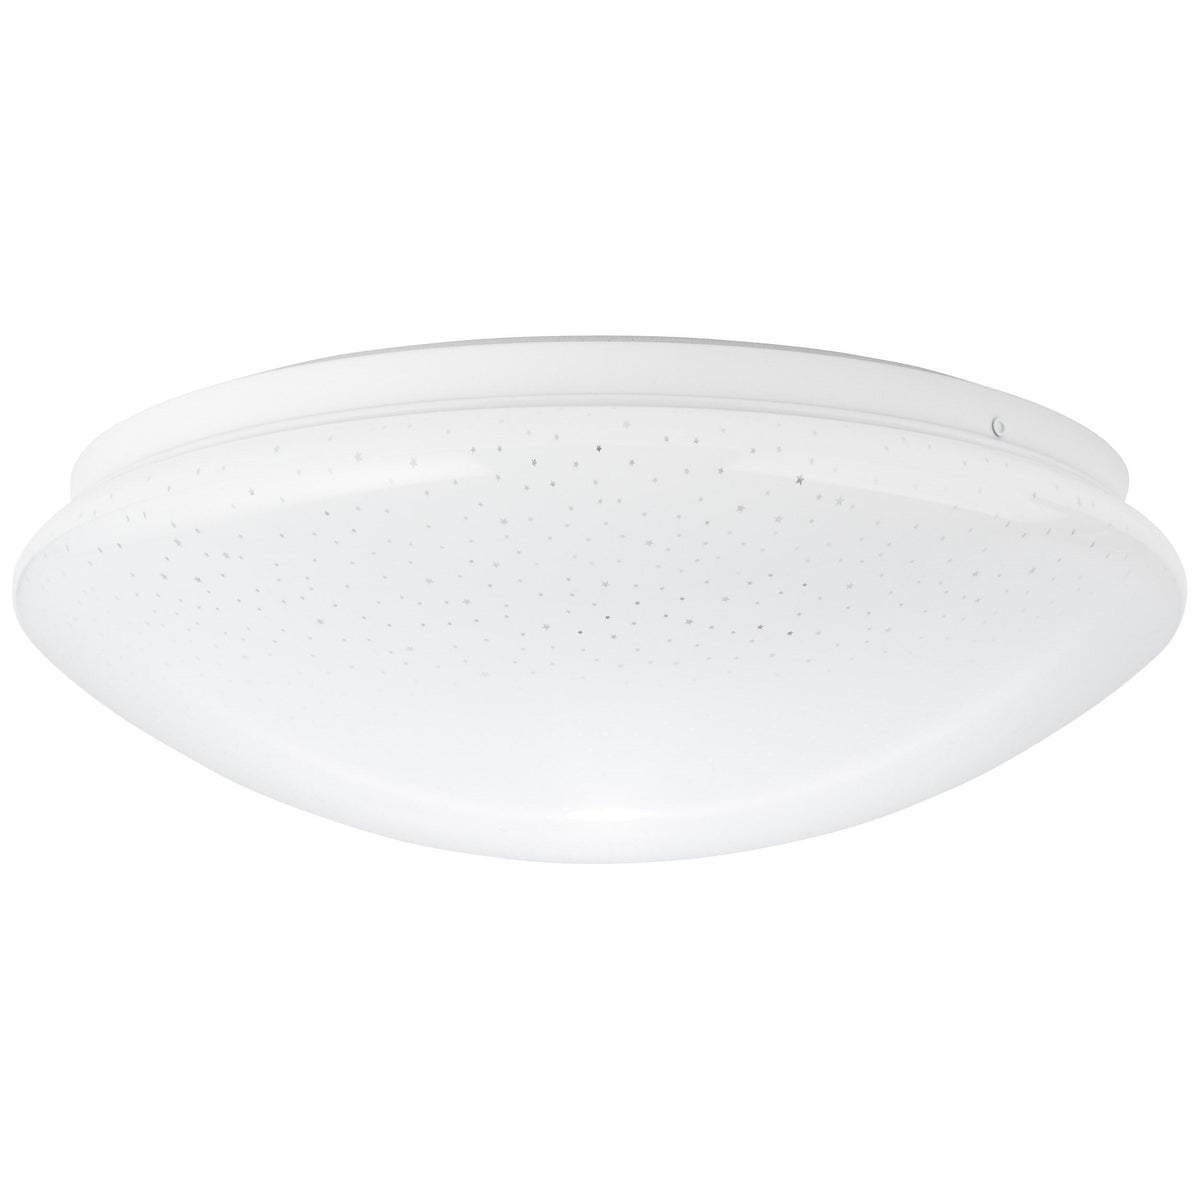 Brilliant 1 Light 12W Fakir Starry LED Wall &amp; Ceiling Light - White &amp; Cold White | G96974/05 from DID Electrical - guaranteed Irish, guaranteed quality service. (6977607827644)